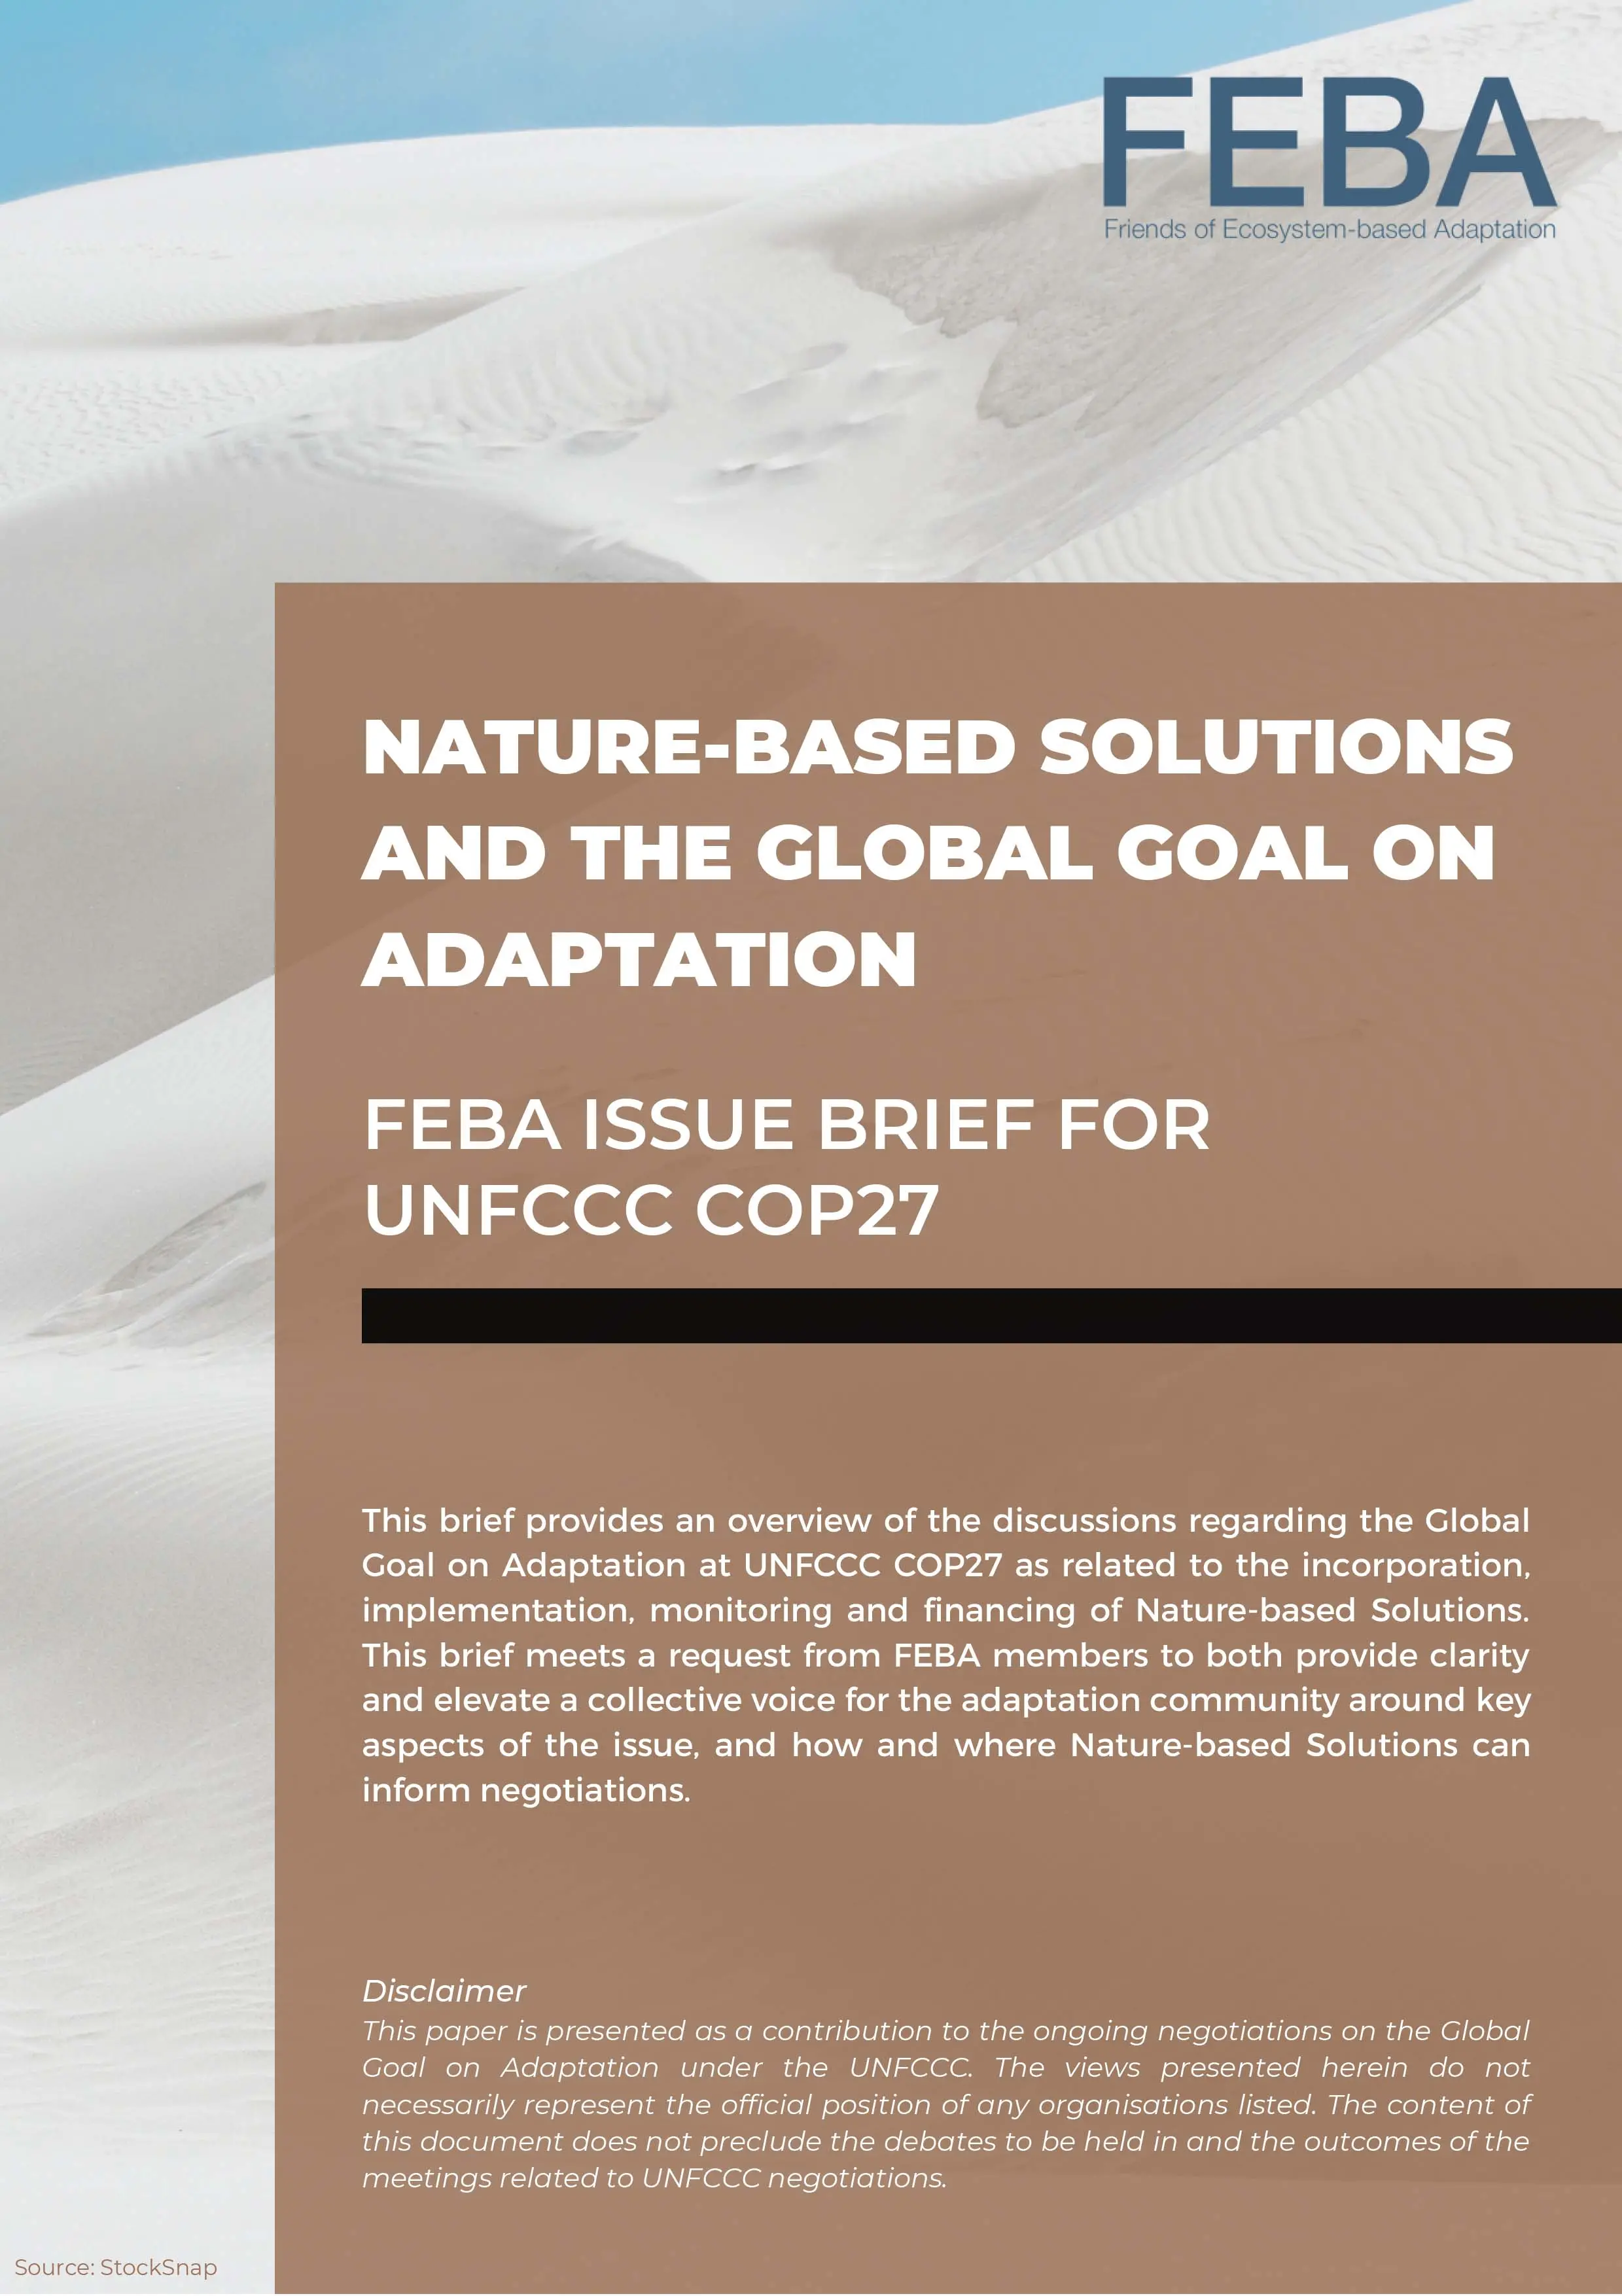 feba-issue-brief-on-nbs-and-the-gga-for-cop27-1.jpg